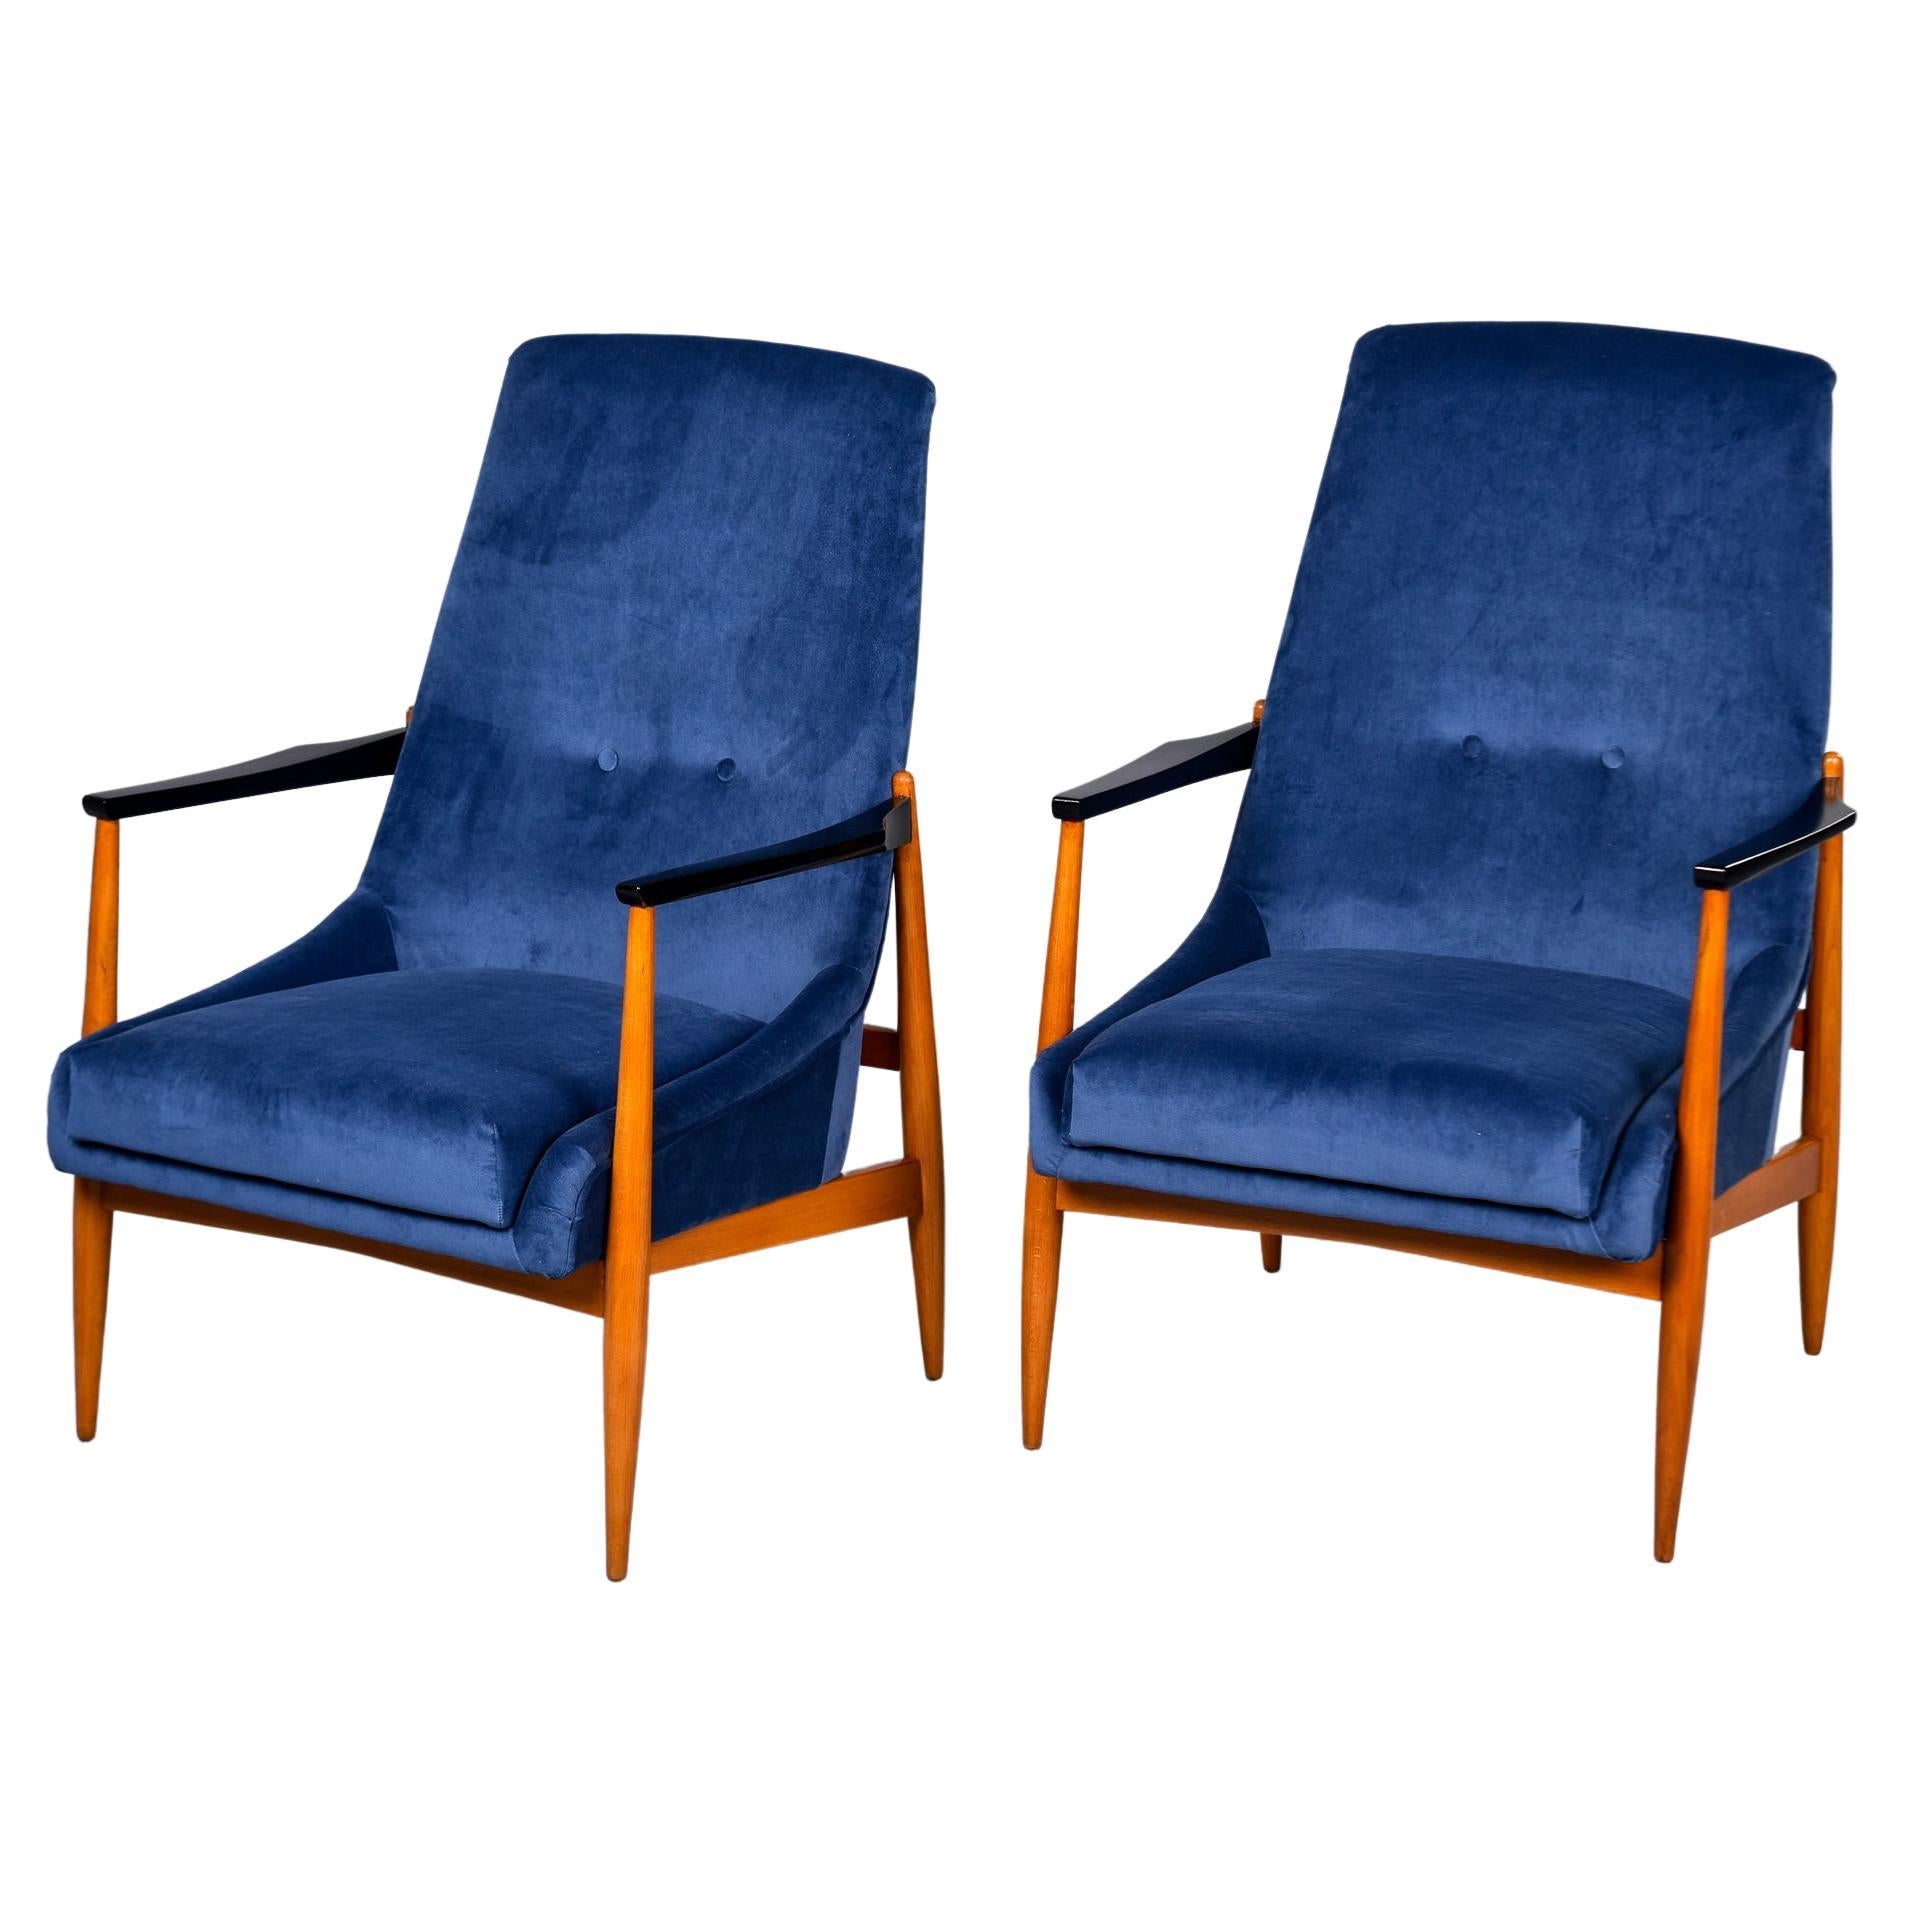 Pair Italian Mid Century Teak Frame Lounge Chairs with New Upholstery For Sale